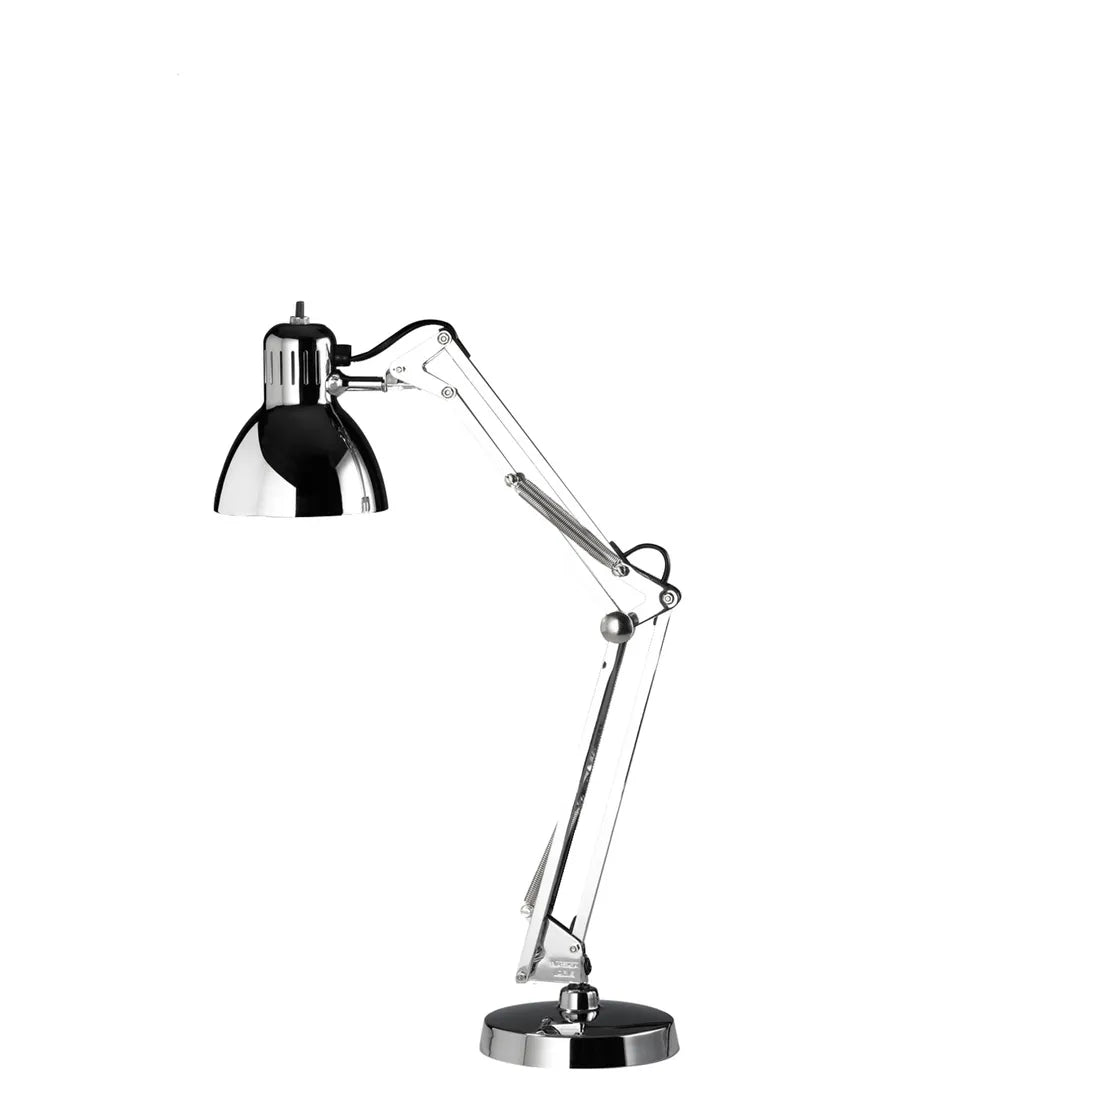 small table lamp, designer metal table lamp, adjustable study table lights online india, Adjustable task Study Small table Lamps online